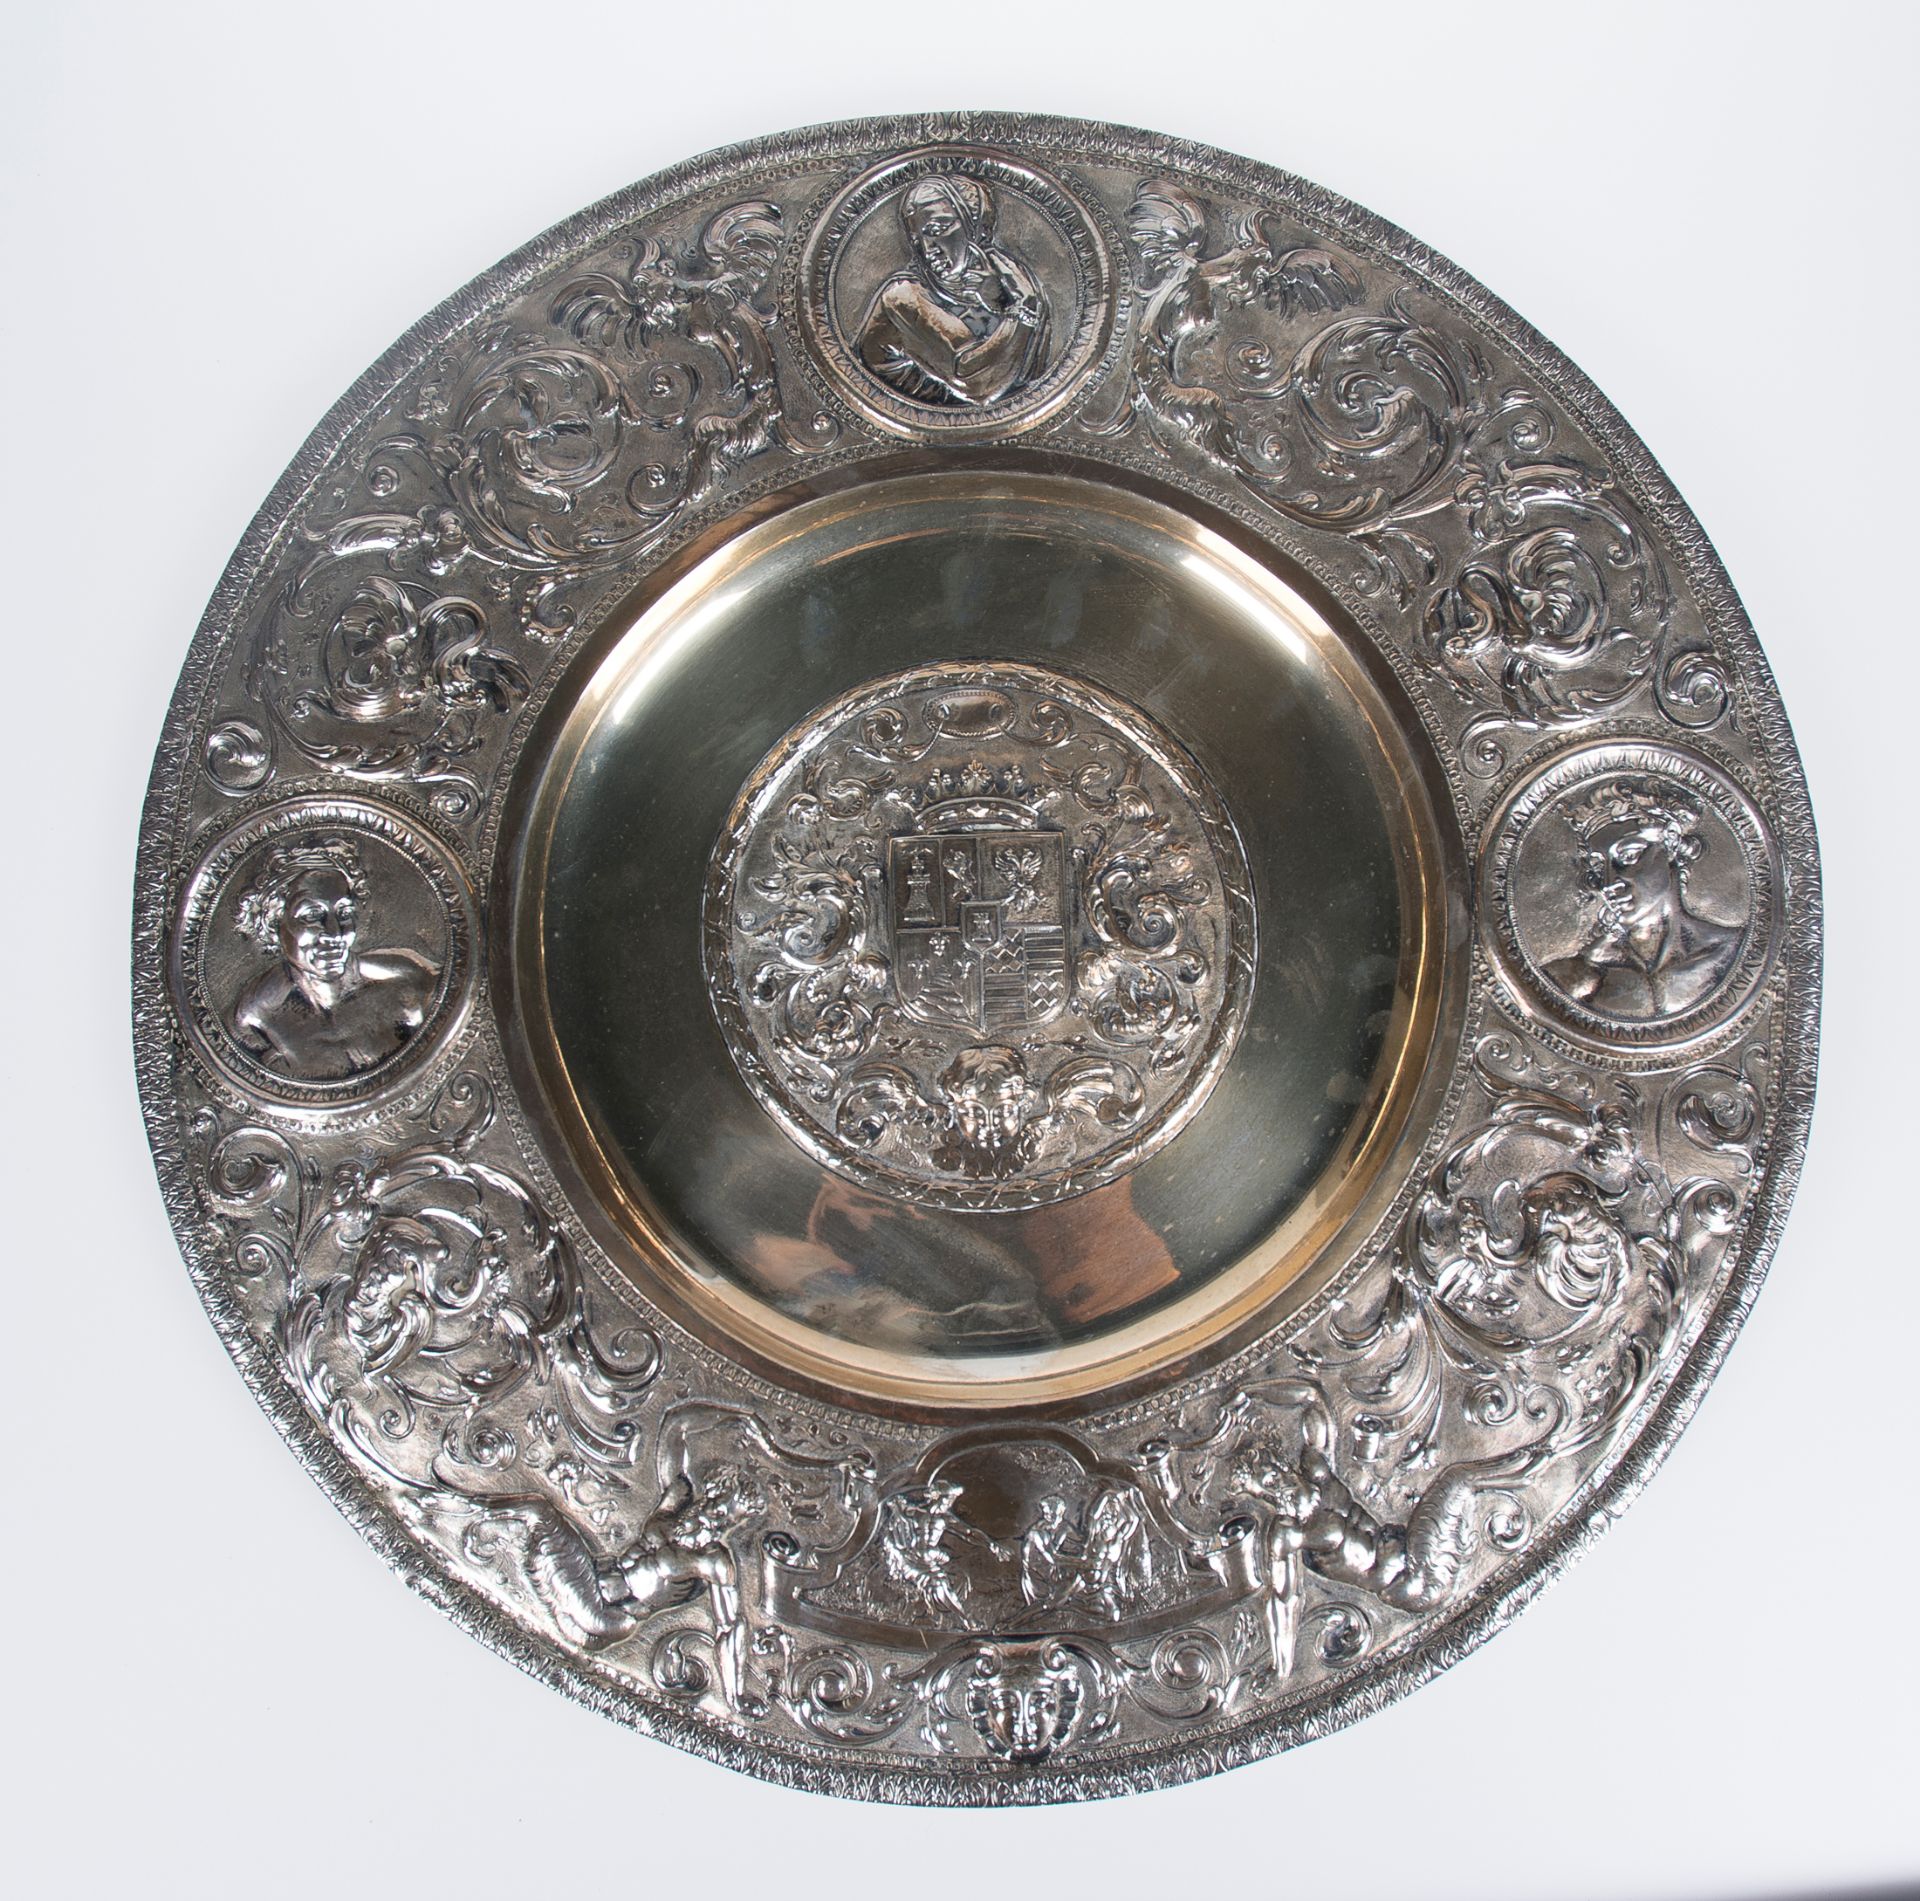 Large, embossed and chased silver plate. 19th century.